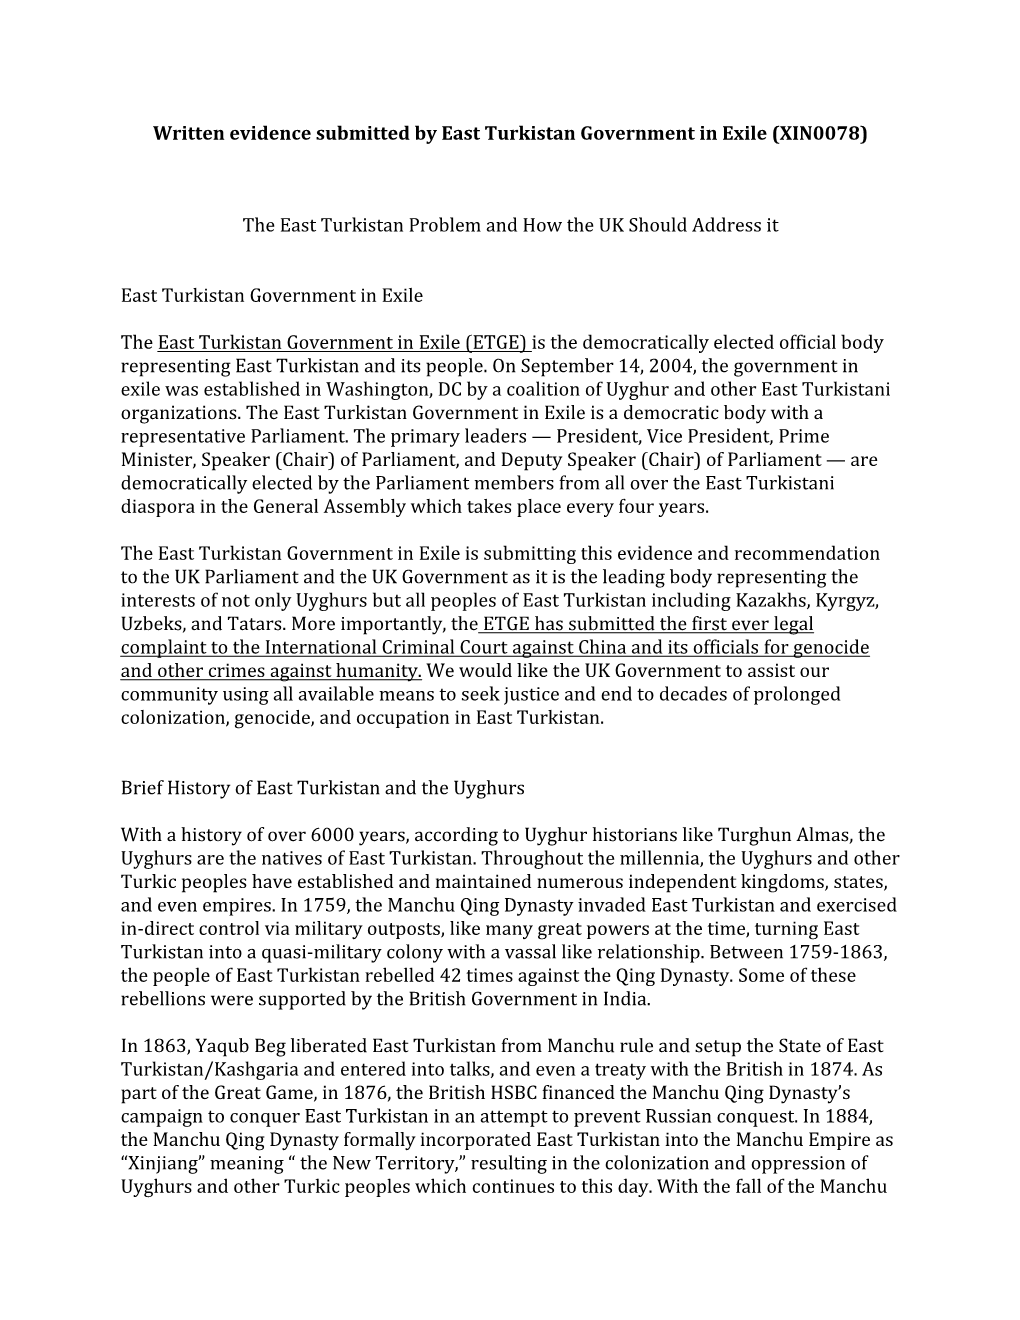 Written Evidence Submitted by East Turkistan Government in Exile (XIN0078)